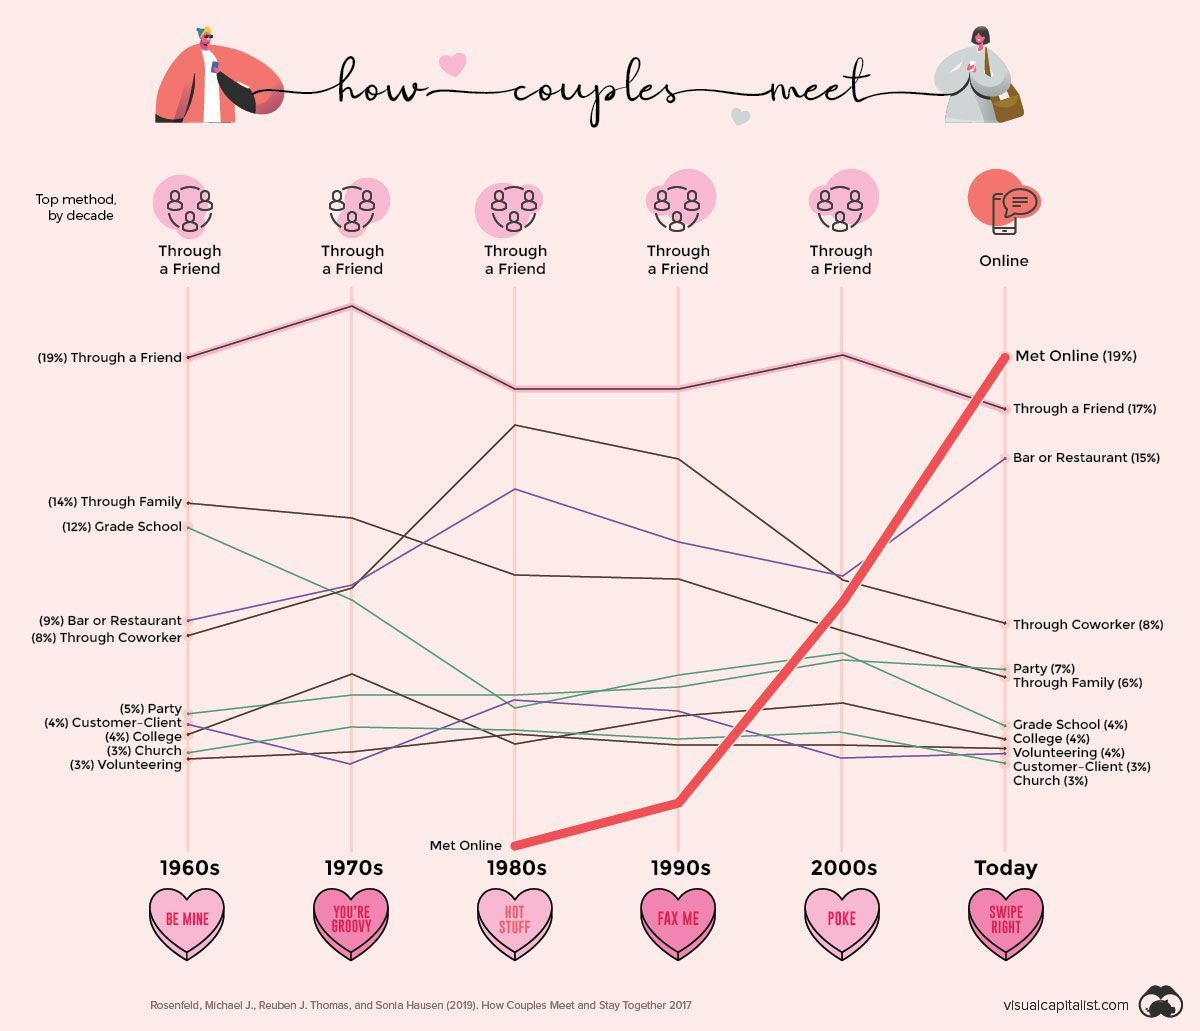 The Rise of Online Dating 💌